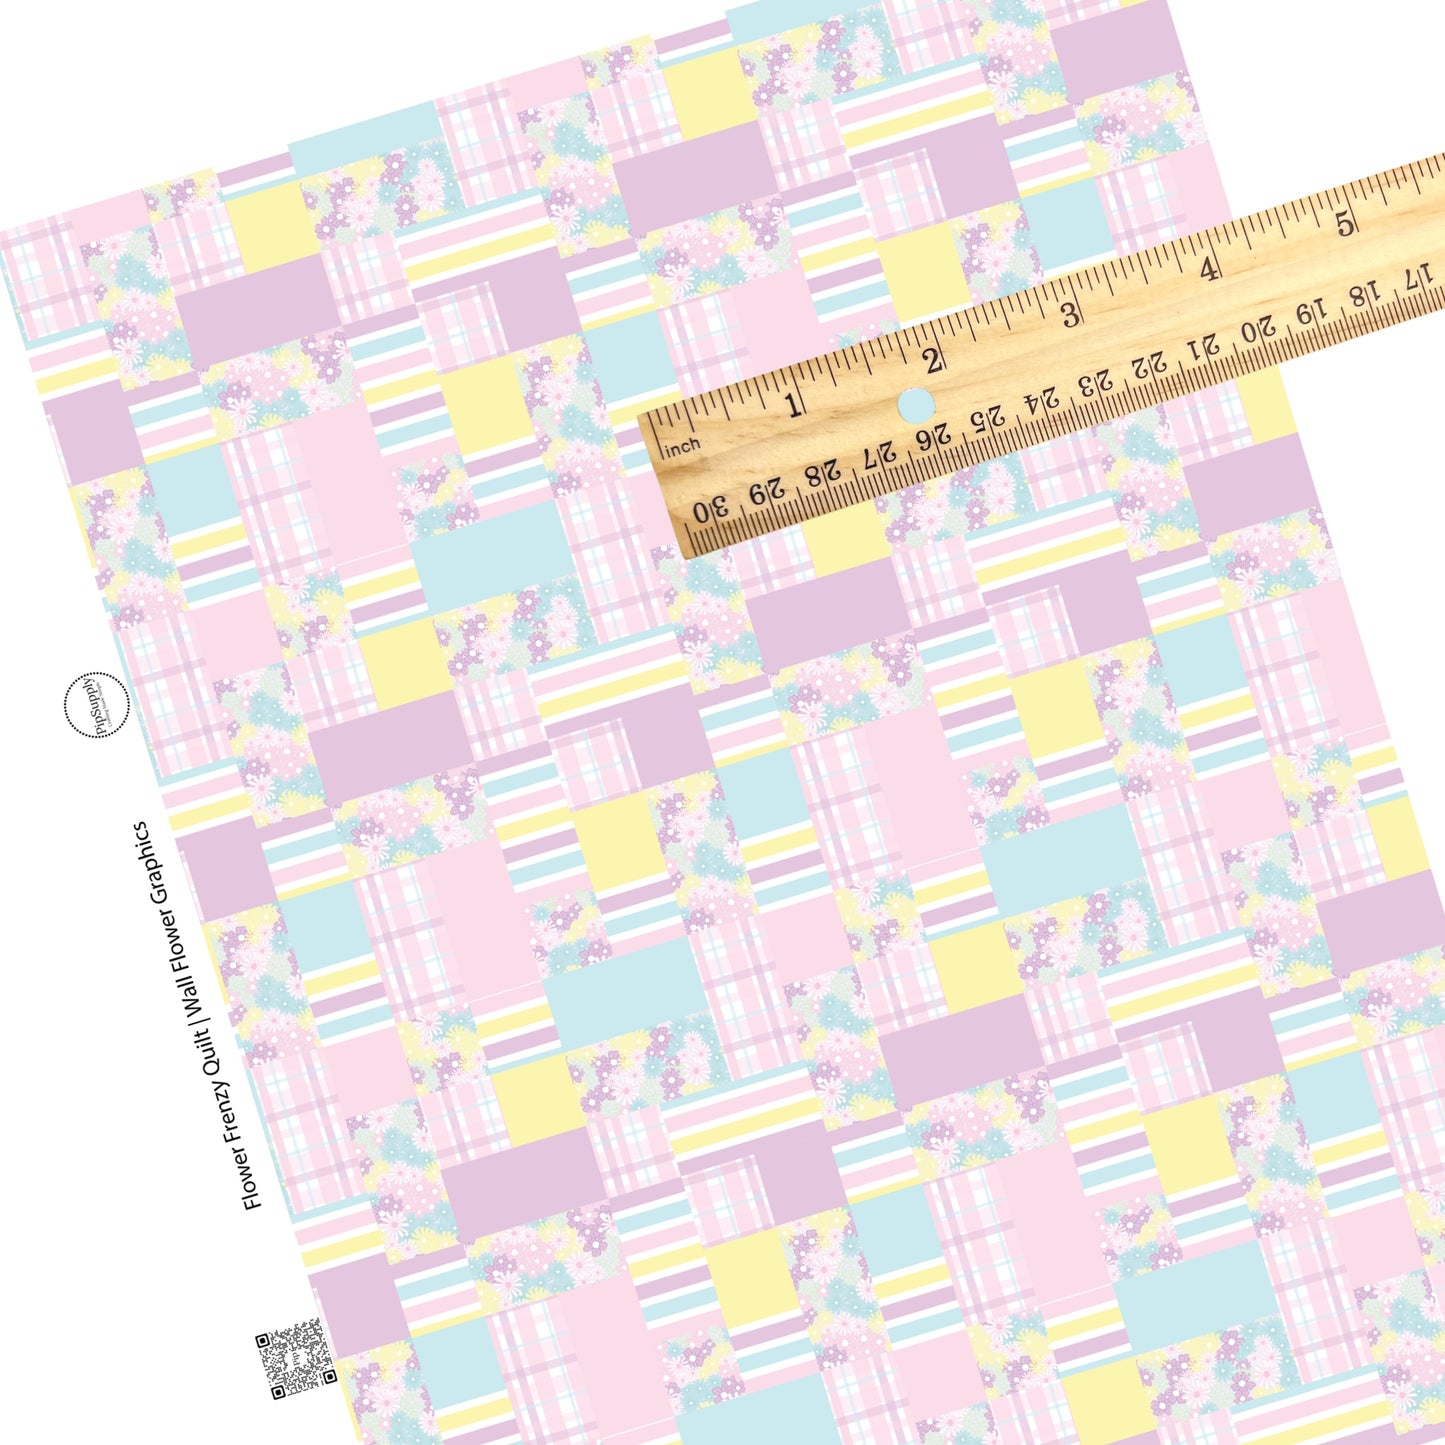 These spring quilt pattern themed faux leather sheets contain the following design elements: quilt pattern with stripes, plaids, flowers, and solid squares in pastel pink, purple, yellow, and blue. Our CPSIA compliant faux leather sheets or rolls can be used for all types of crafting projects.